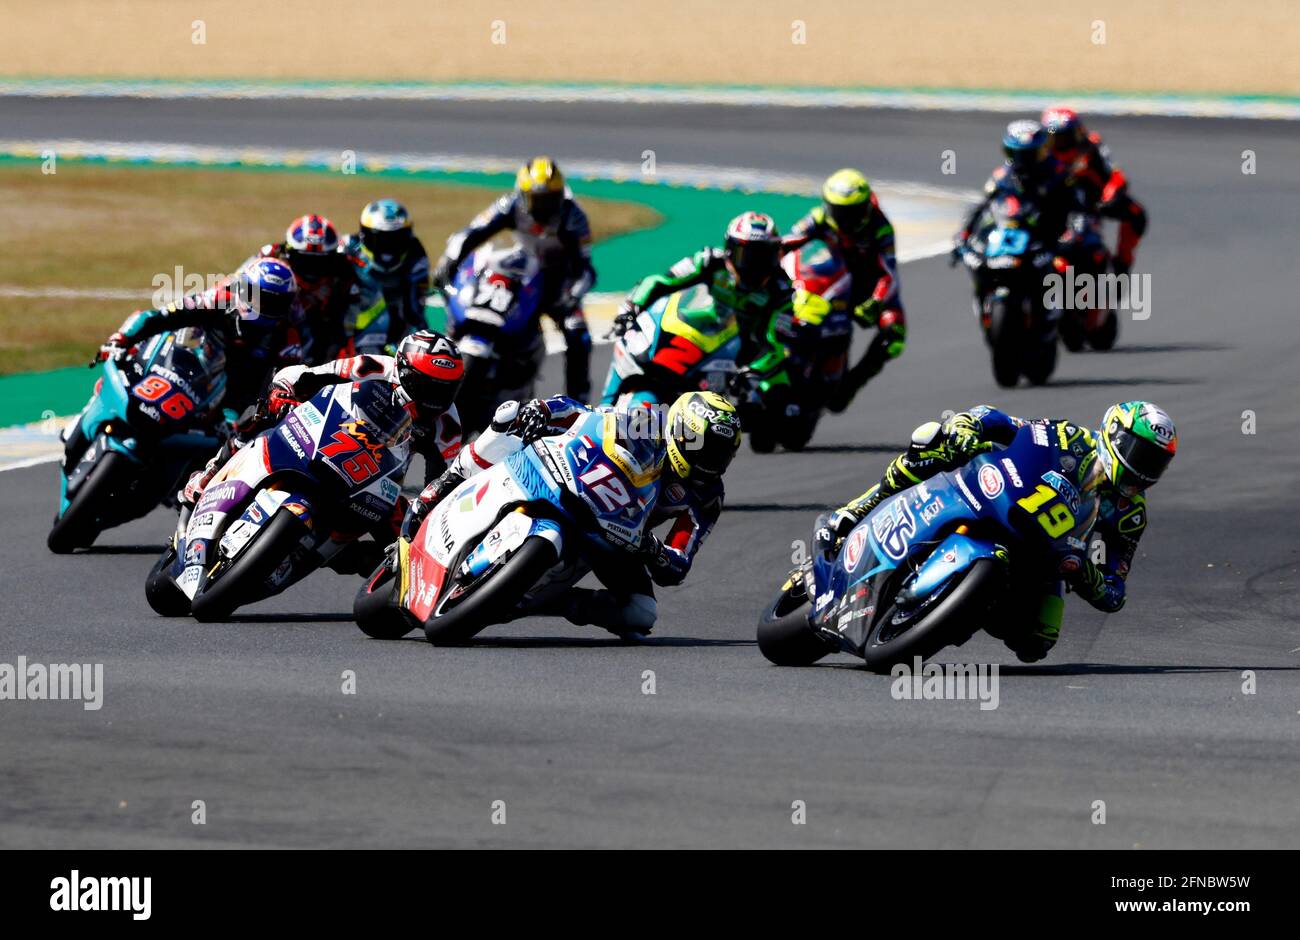 MotoGP - French Grand Prix - Circuit Bugatti, Le Mans, France - May 16,  2021 General view at the start of the race REUTERS/Stephane Mahe Stock  Photo - Alamy